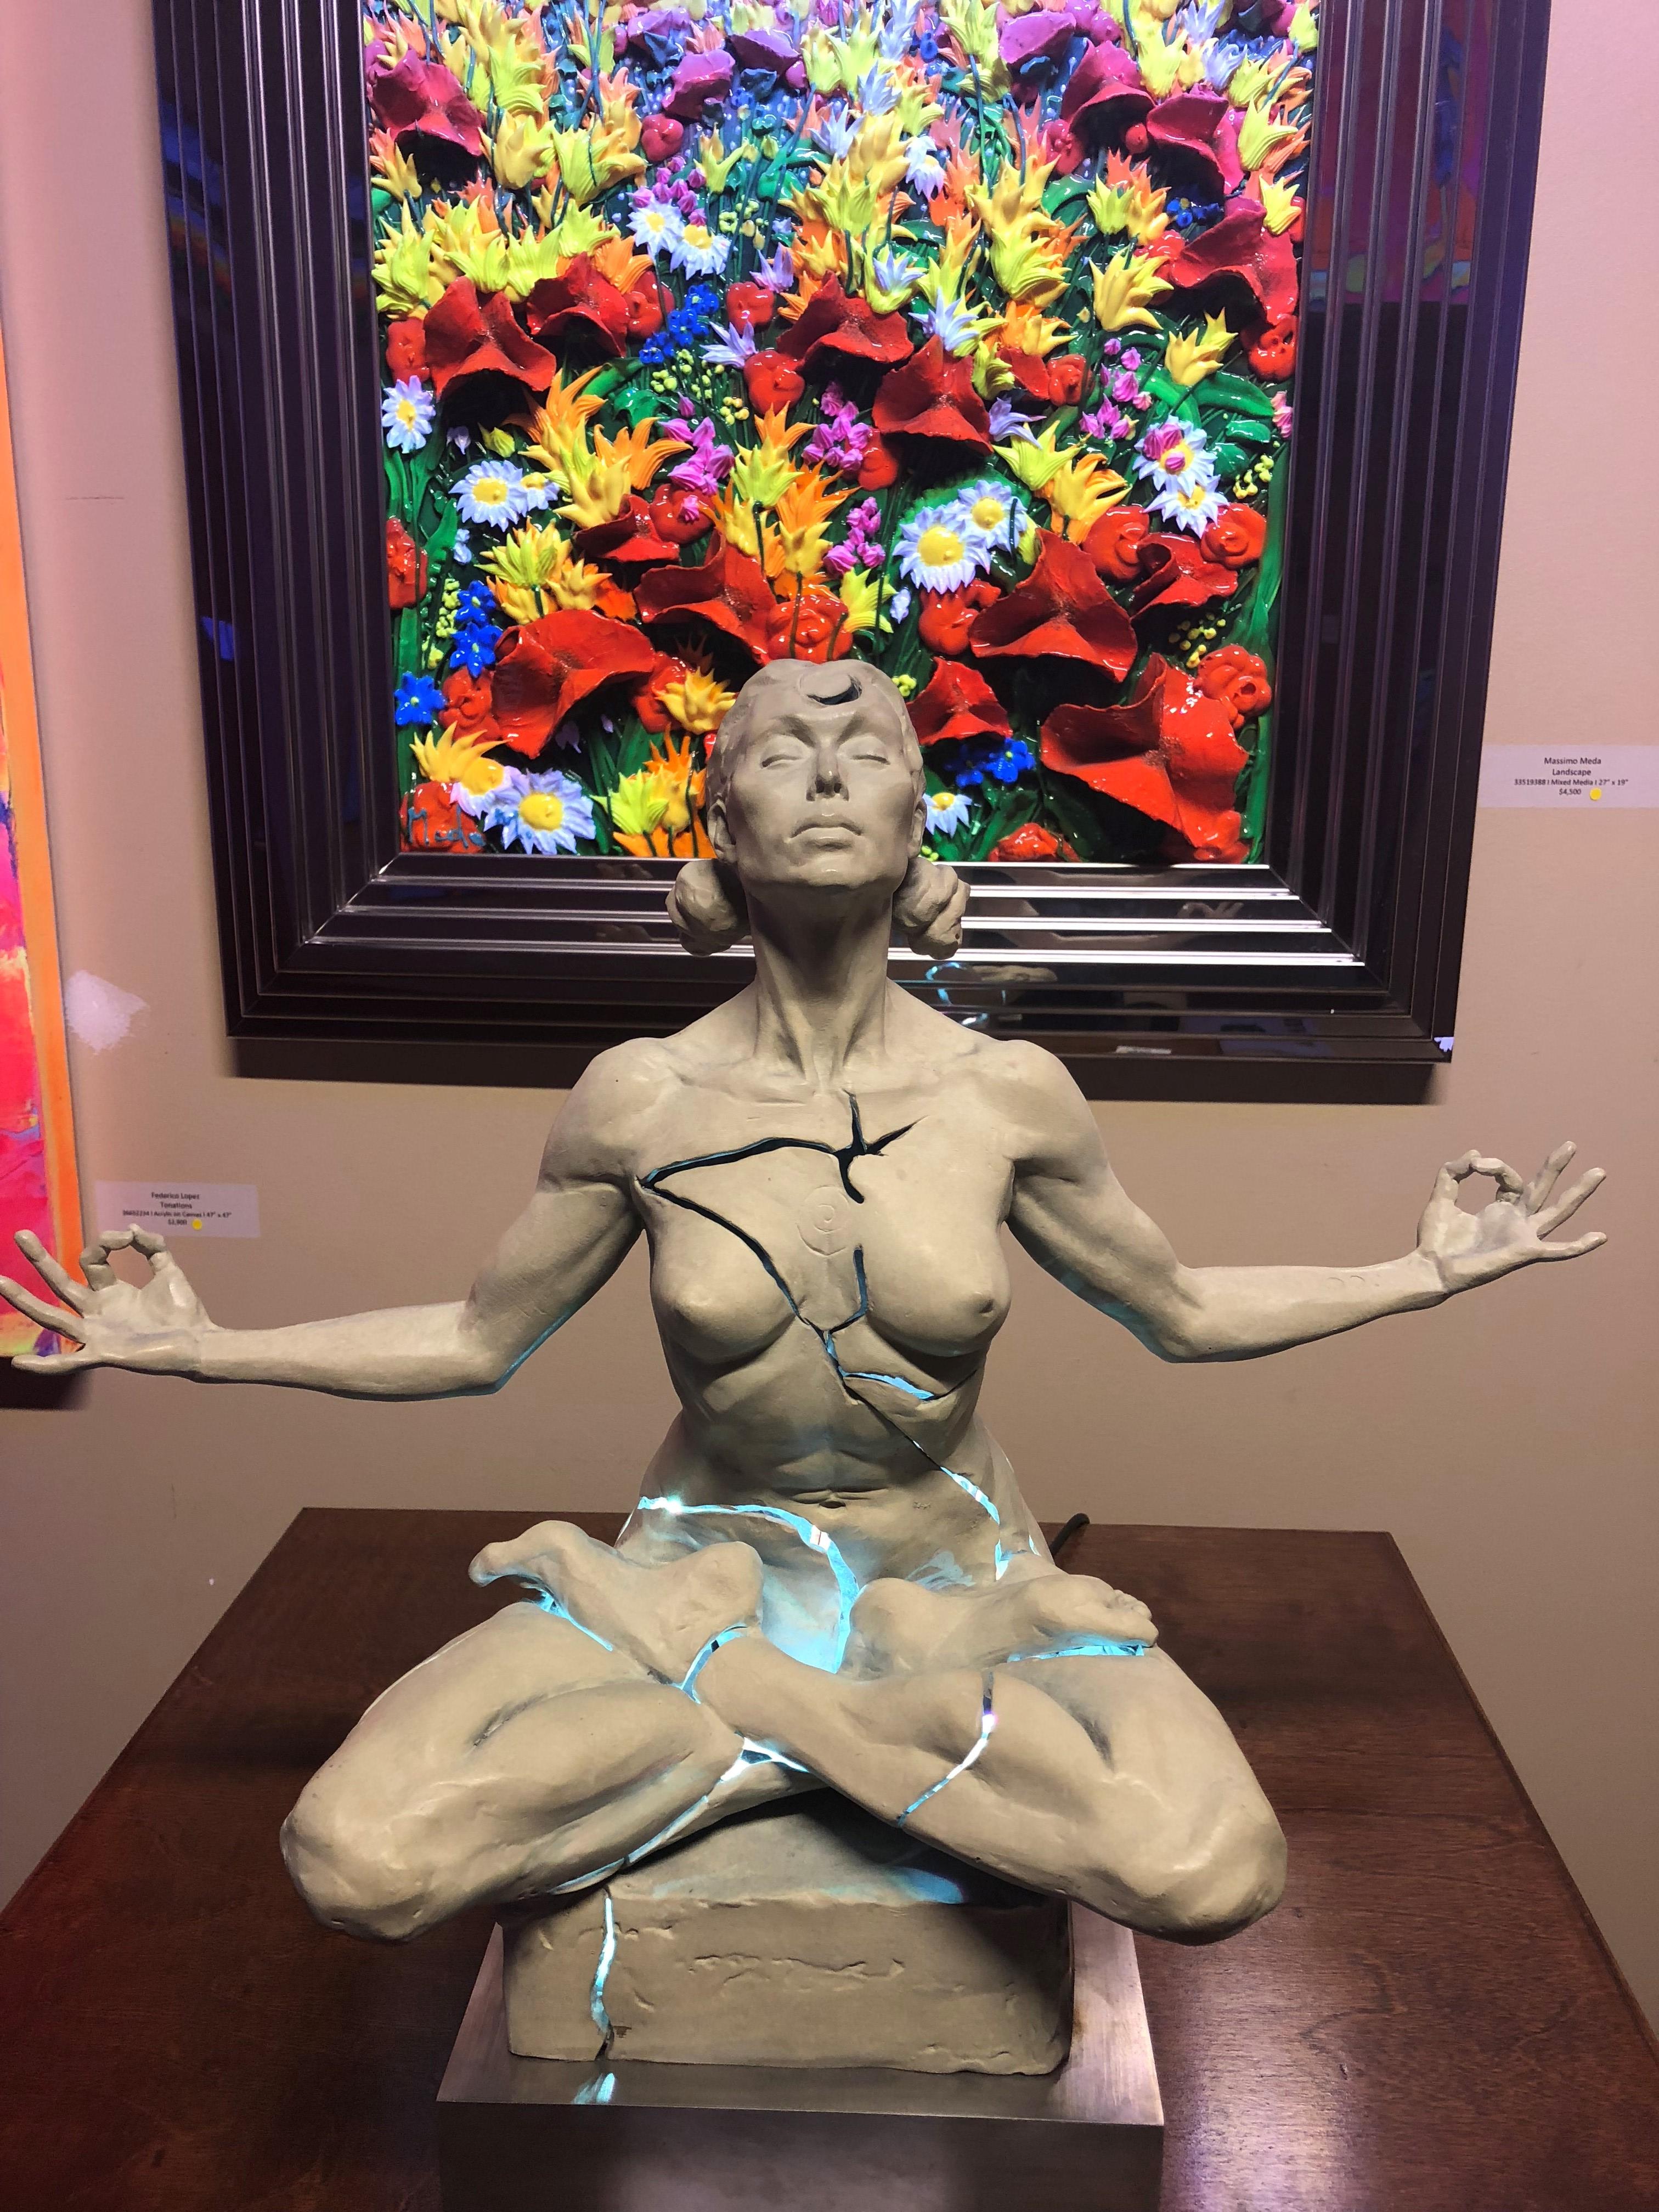 Item is in excellent condition and has only been displayed in a gallery setting. Sculpture softly changes colors. Remote control powered. 

Born in Carmel, California Paige Bradley knew she would be an artist by the age of nine. Immersed in nature